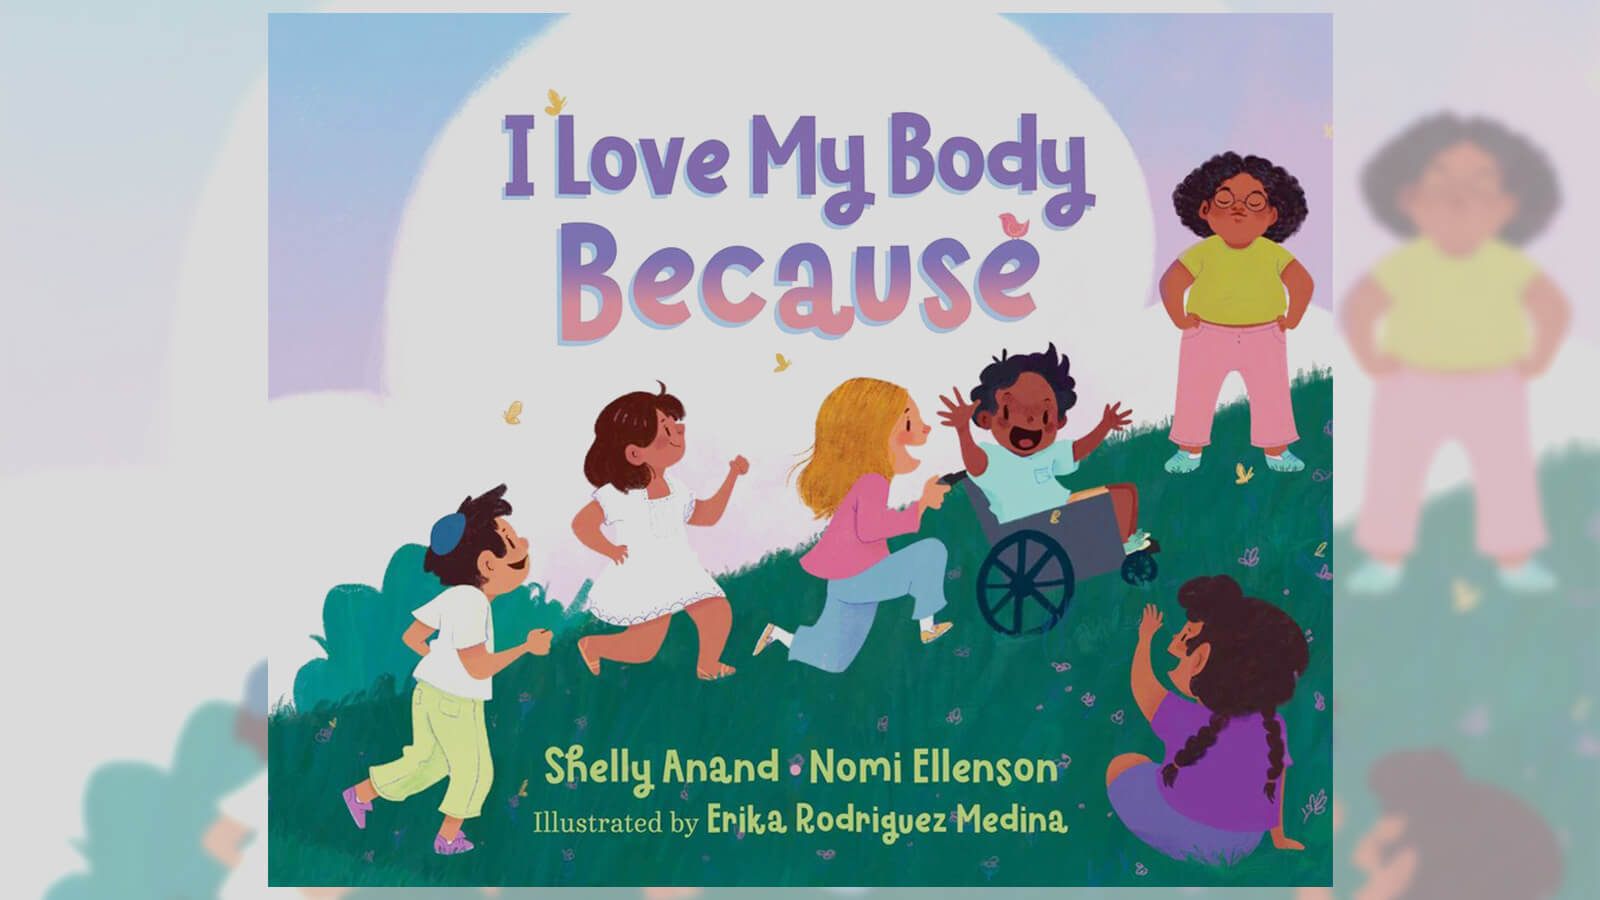 Image of children's book I Love My Body Because by Shelly Anand and Nomi Ellenson